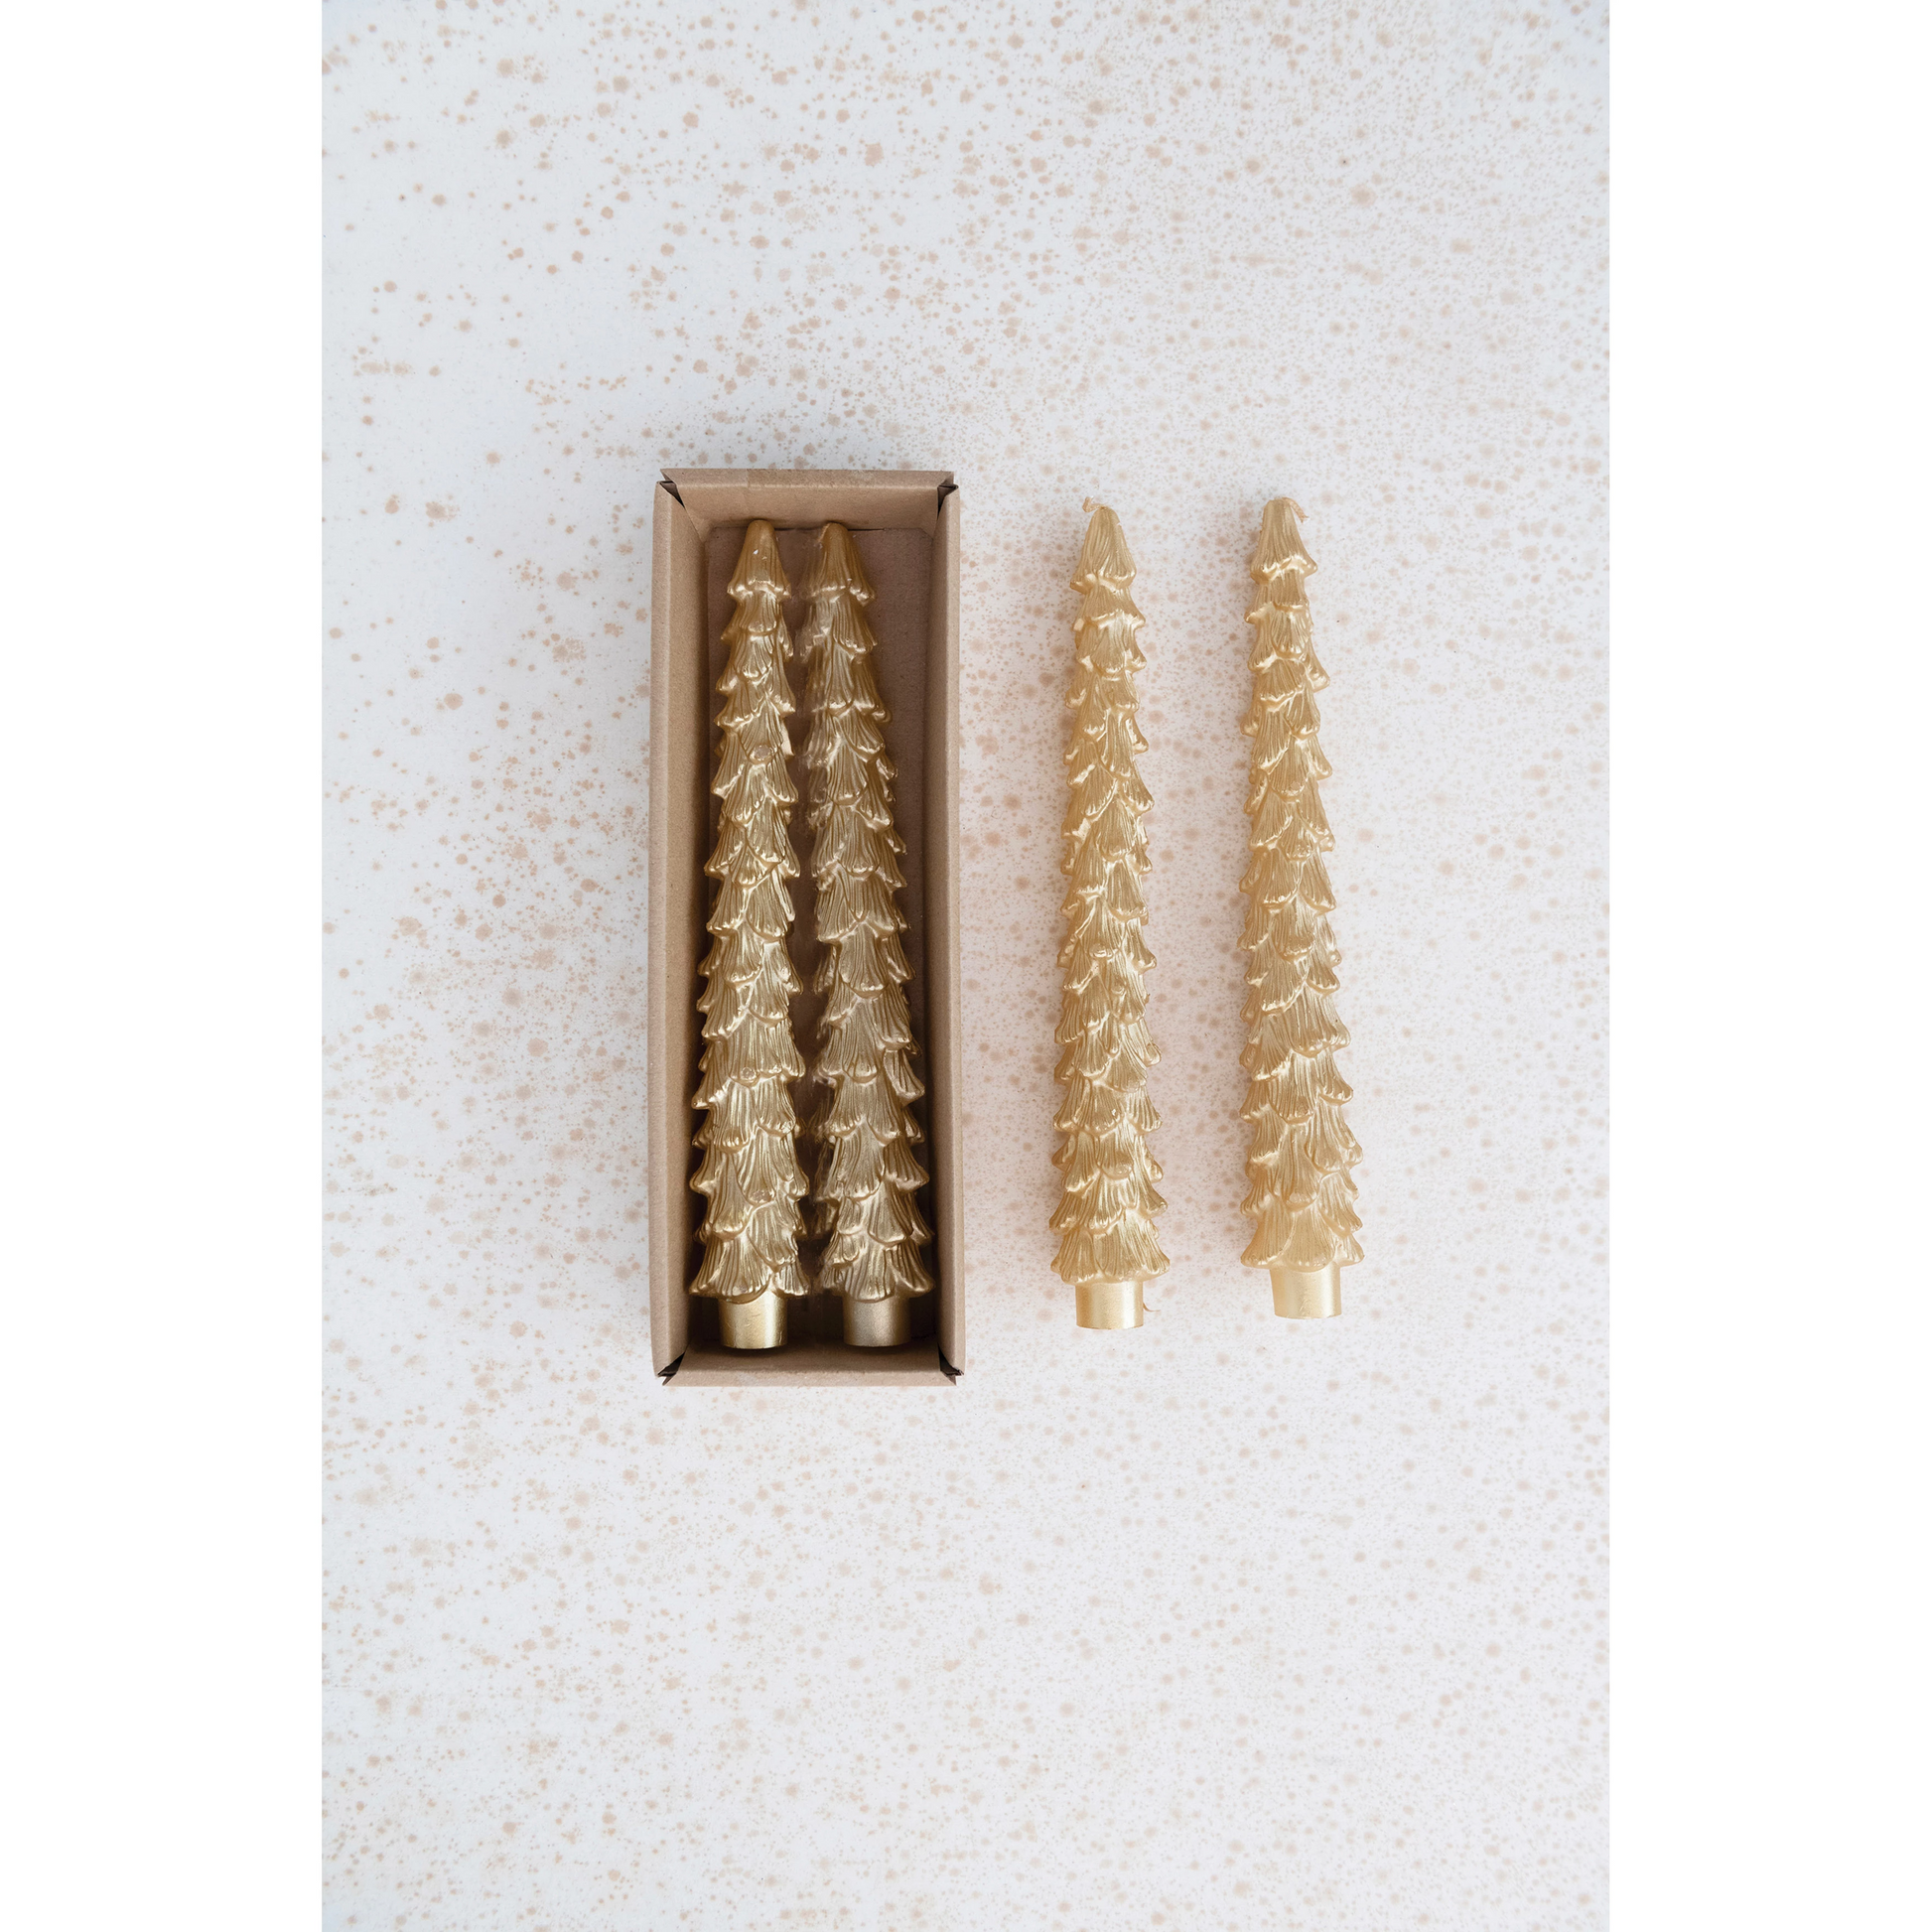 Unscented Gold Tree Shaped Taper Candles - Set of 2 - 10"H - Mellow Monkey